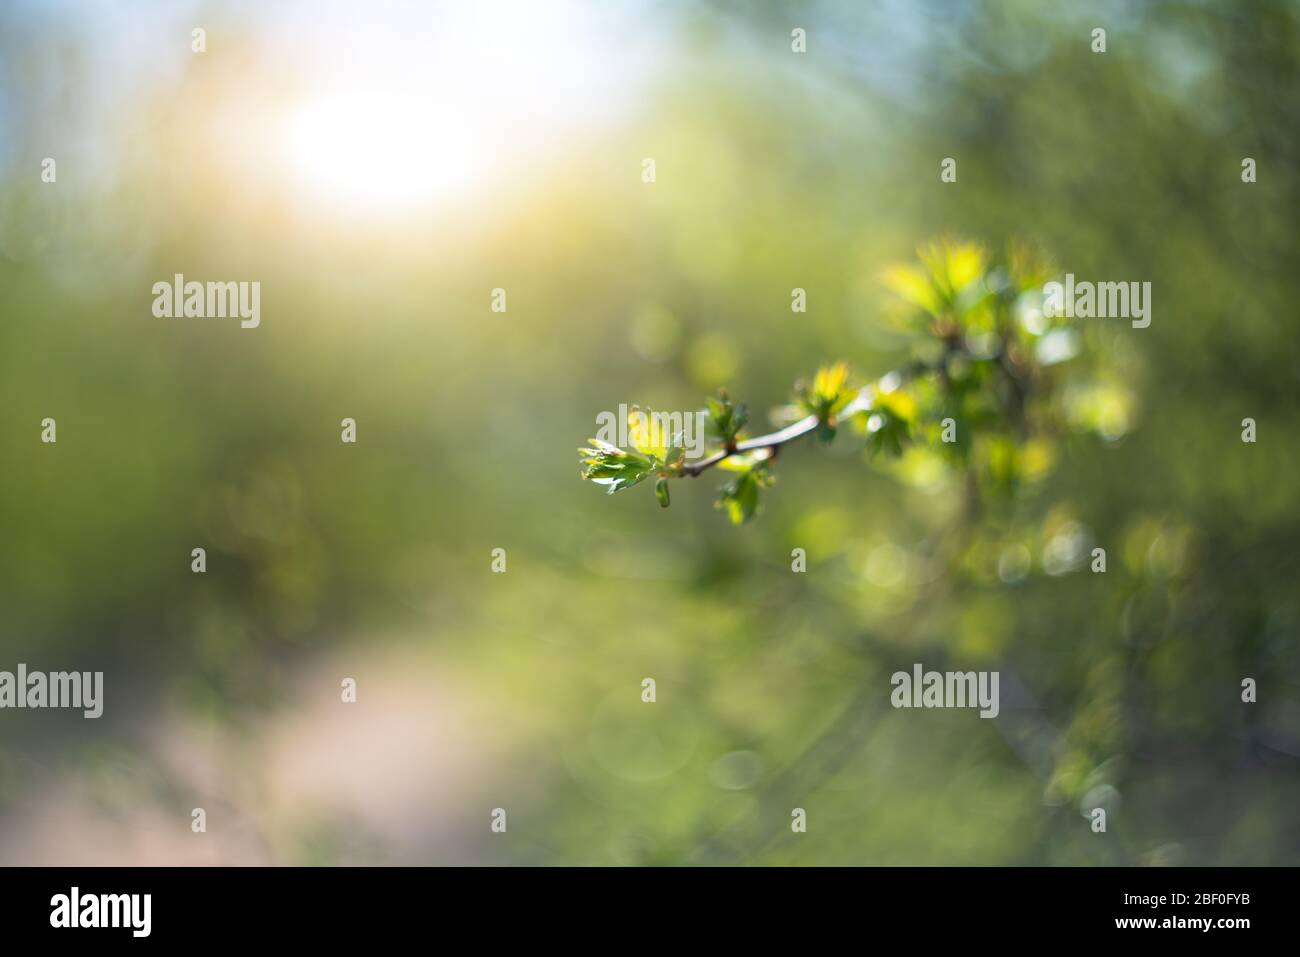 Tree branches in sunlight. Spring background. Stock Photo